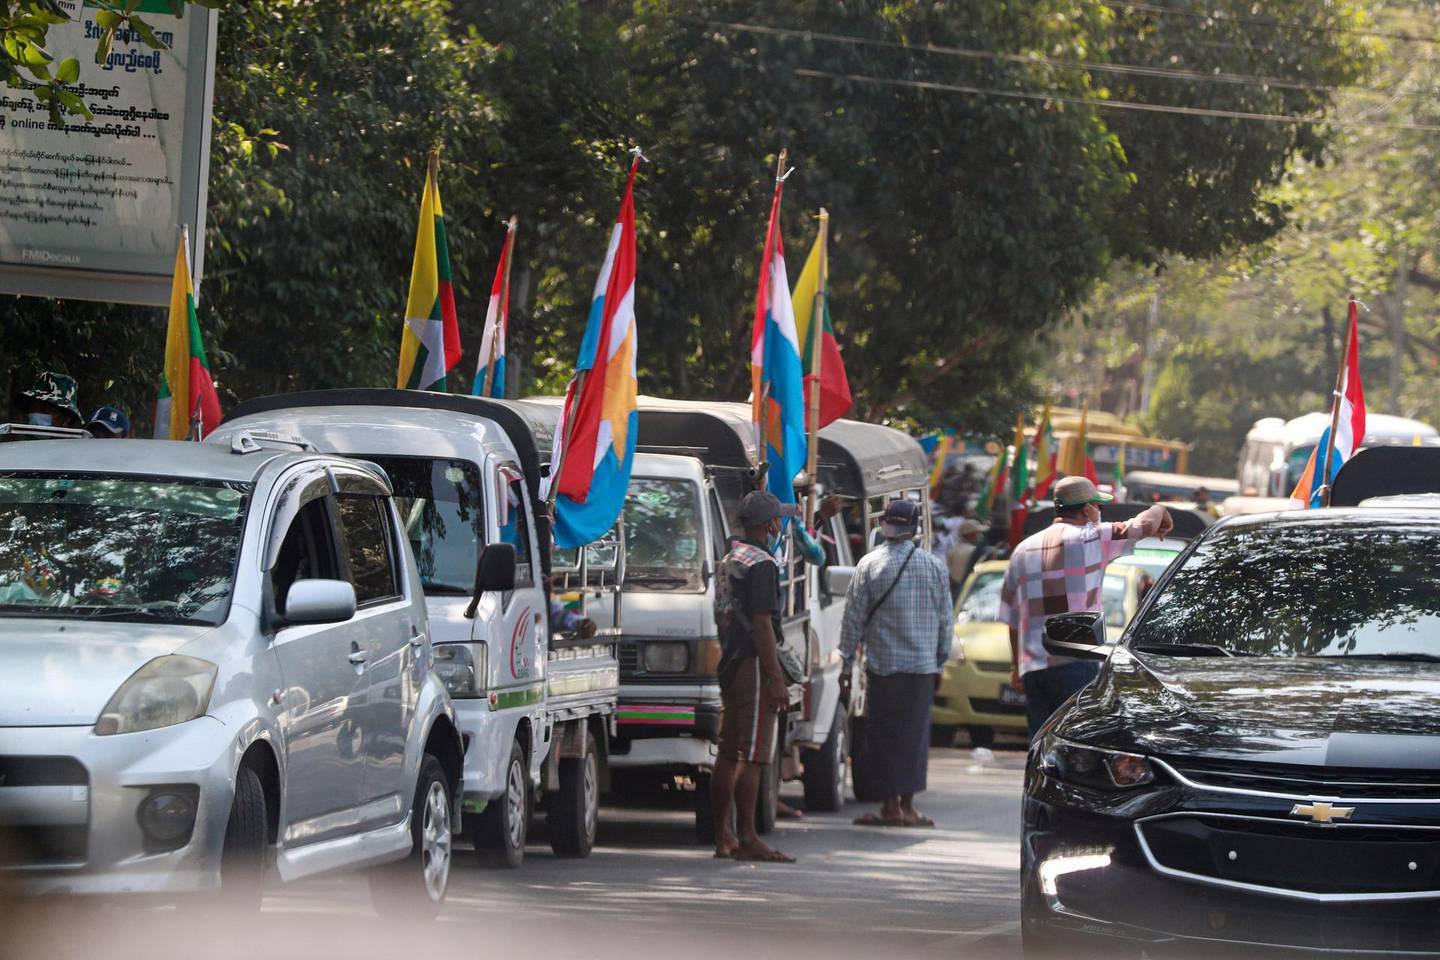 Supporters of the Myanmar military gather near trucks adorned with the military flag, Buddhist religious flag and national flag Monday, Feb. 1, 2021, in Yangon, Myanmar. Myanmar military television said Monday that the military was taking control of the country for one year, while reports said many of the country's senior politicians including Aung San Suu Kyi had been detained. (AP Photo/Thein Zaw)